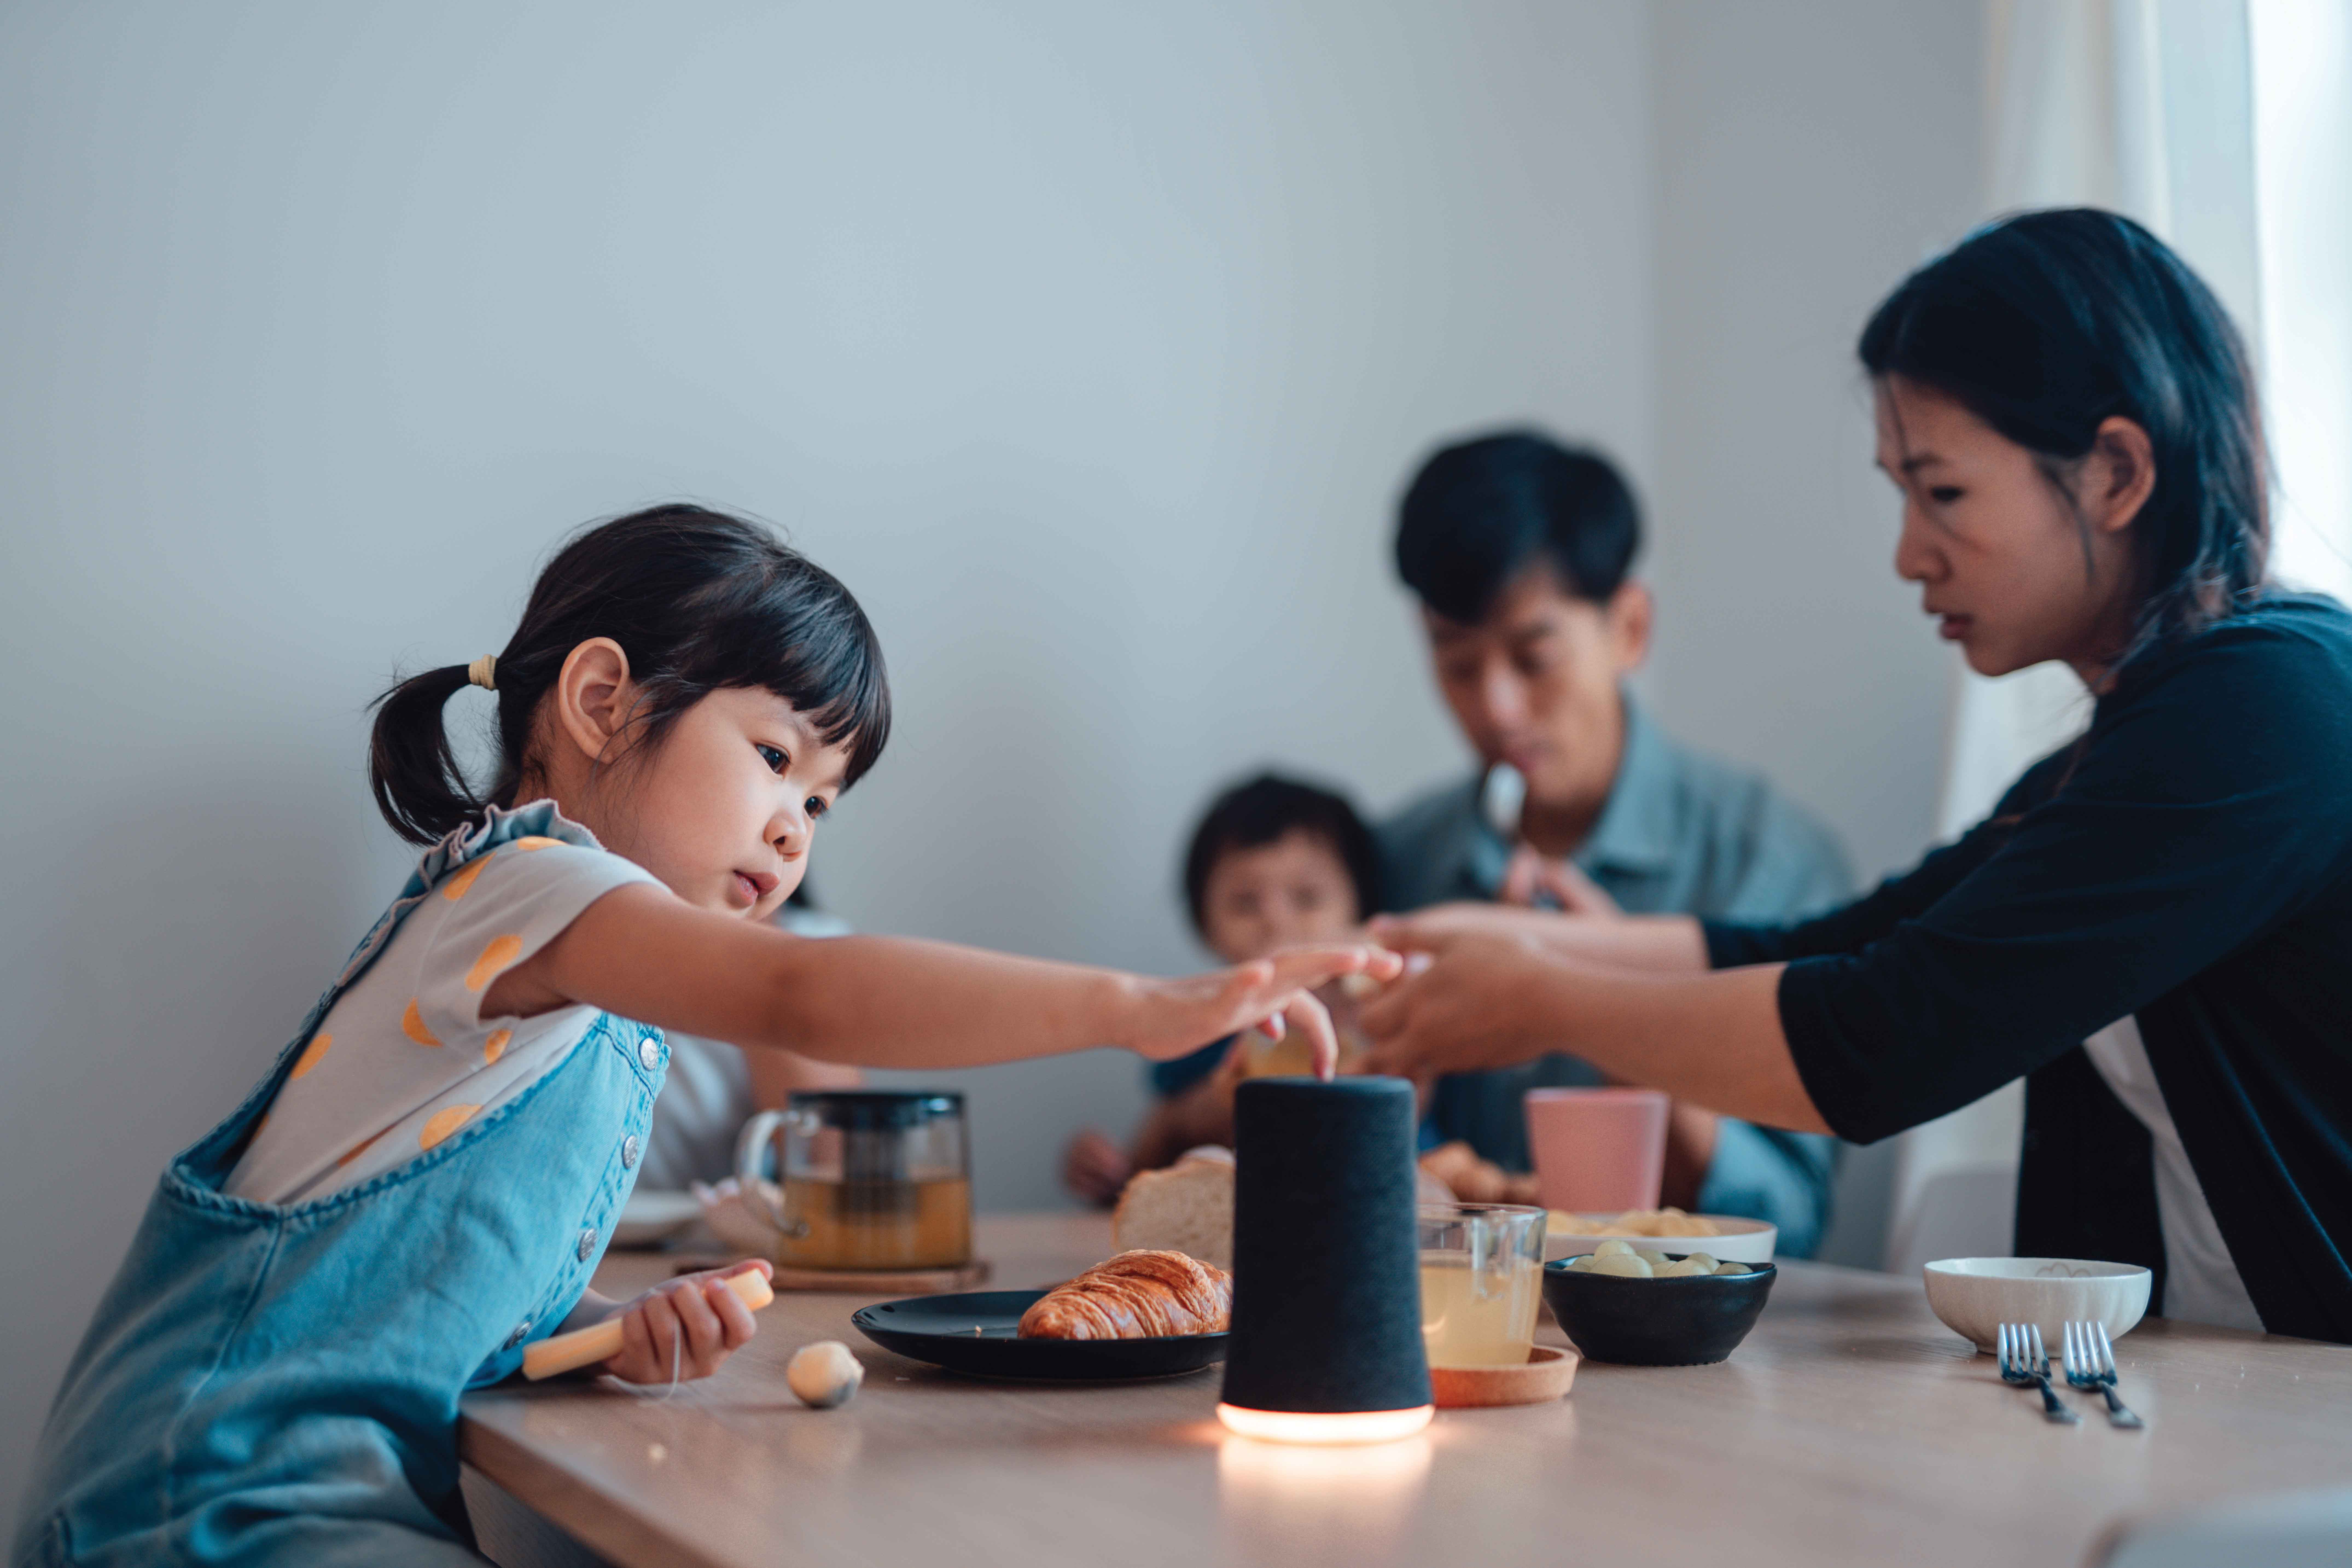 Picture that shows little girl touching a speaker at dinner table with family